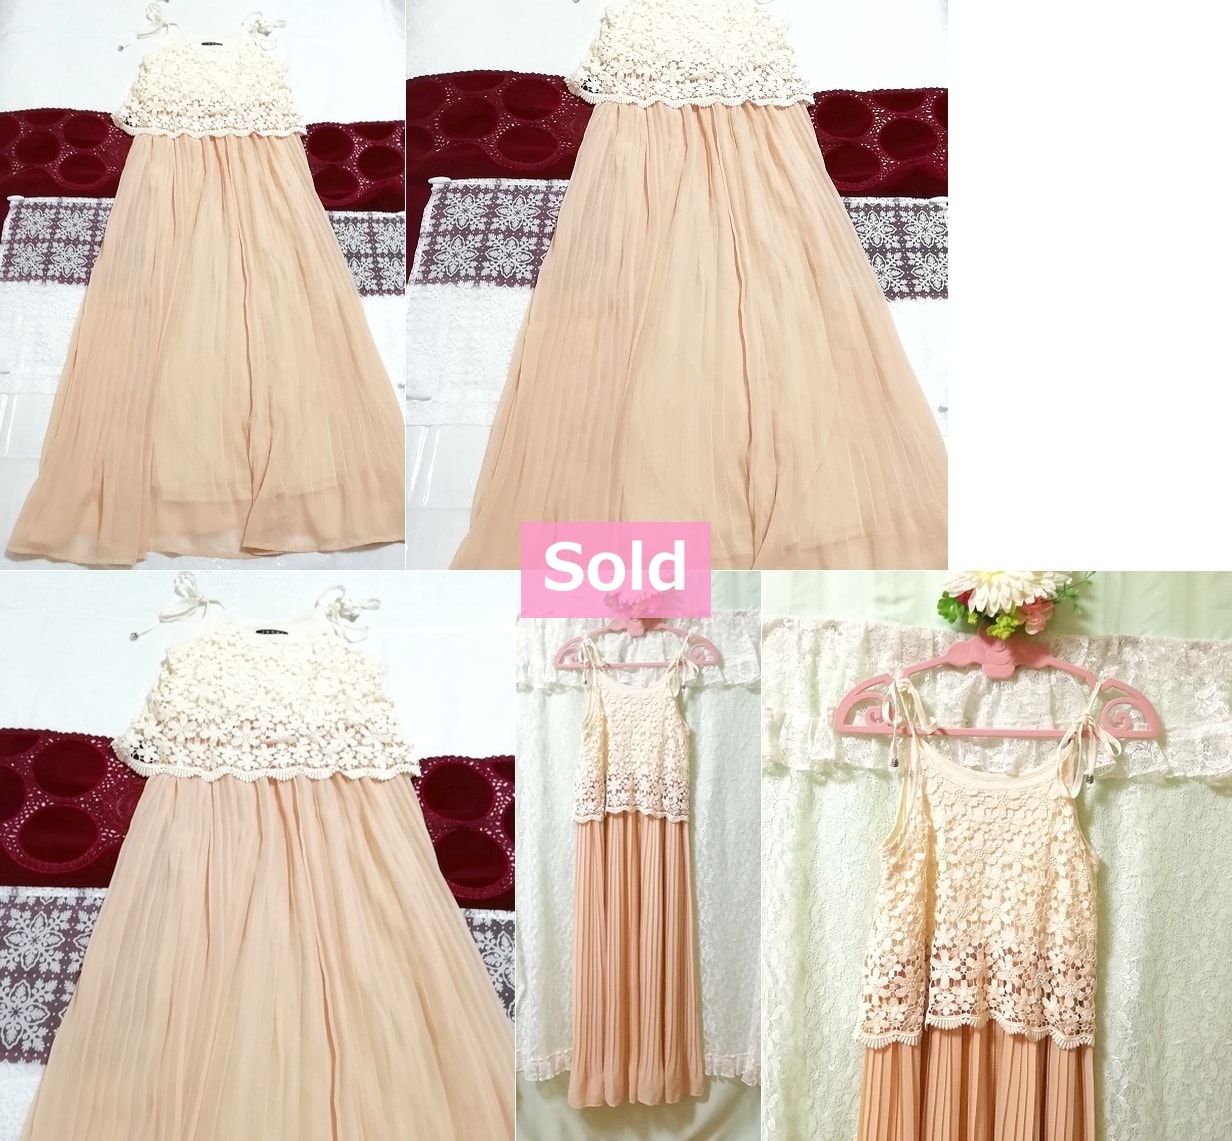 INGNI white lace camisole pink skirt maxi onepiece dress